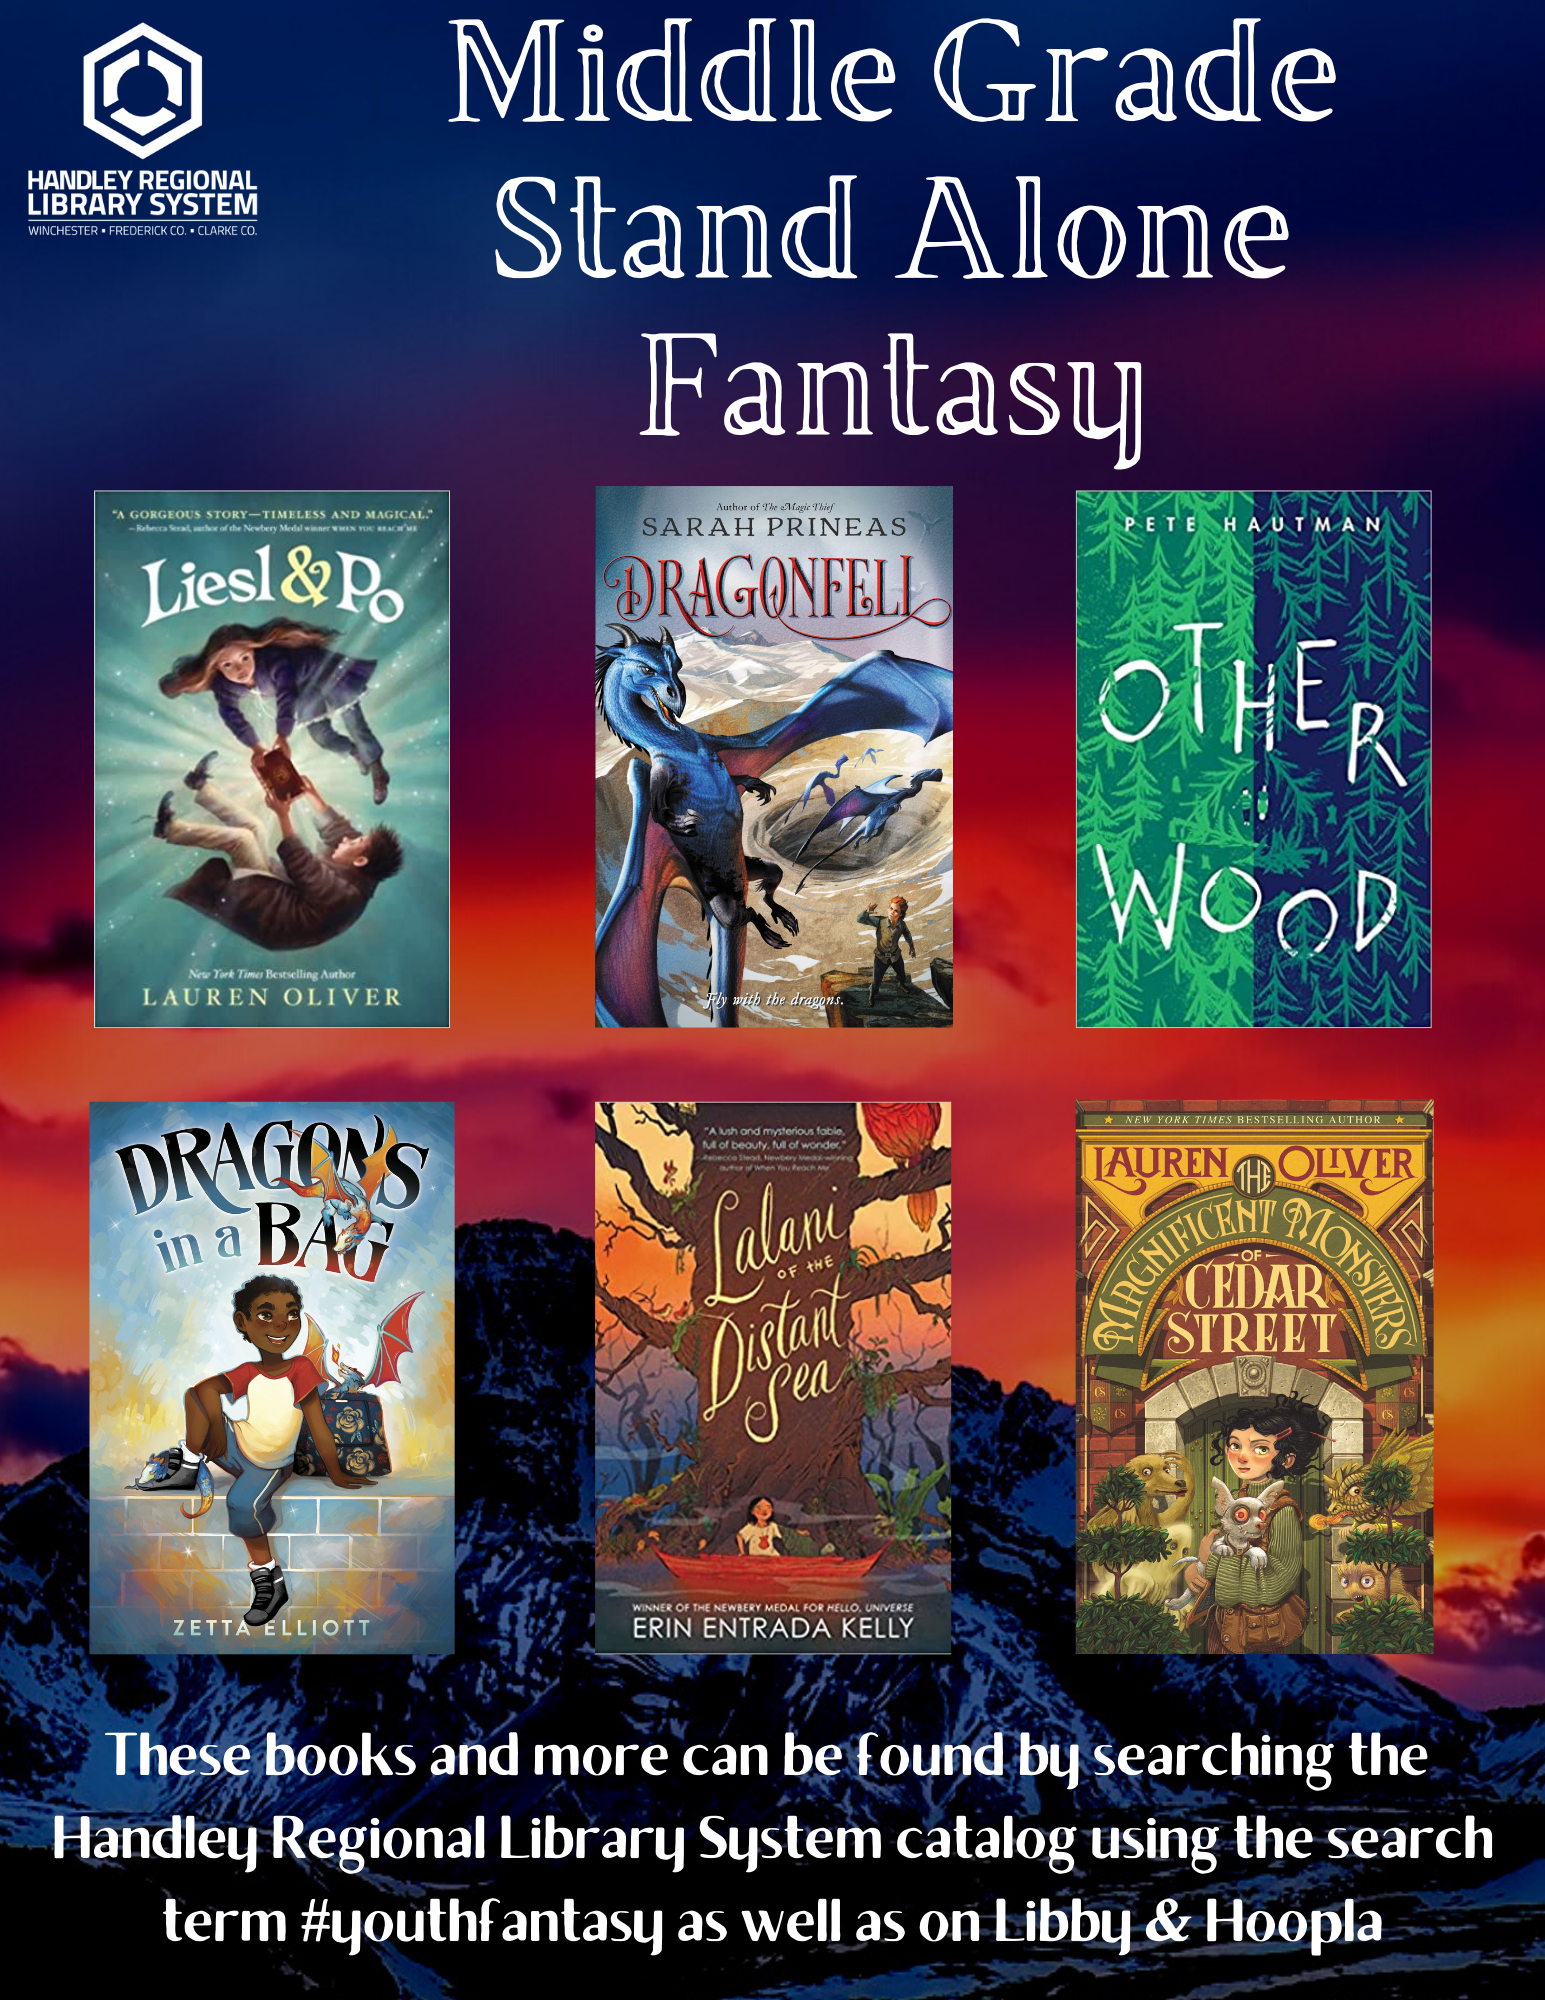 Middle Grade Stand Alone Fantasy Book Covers